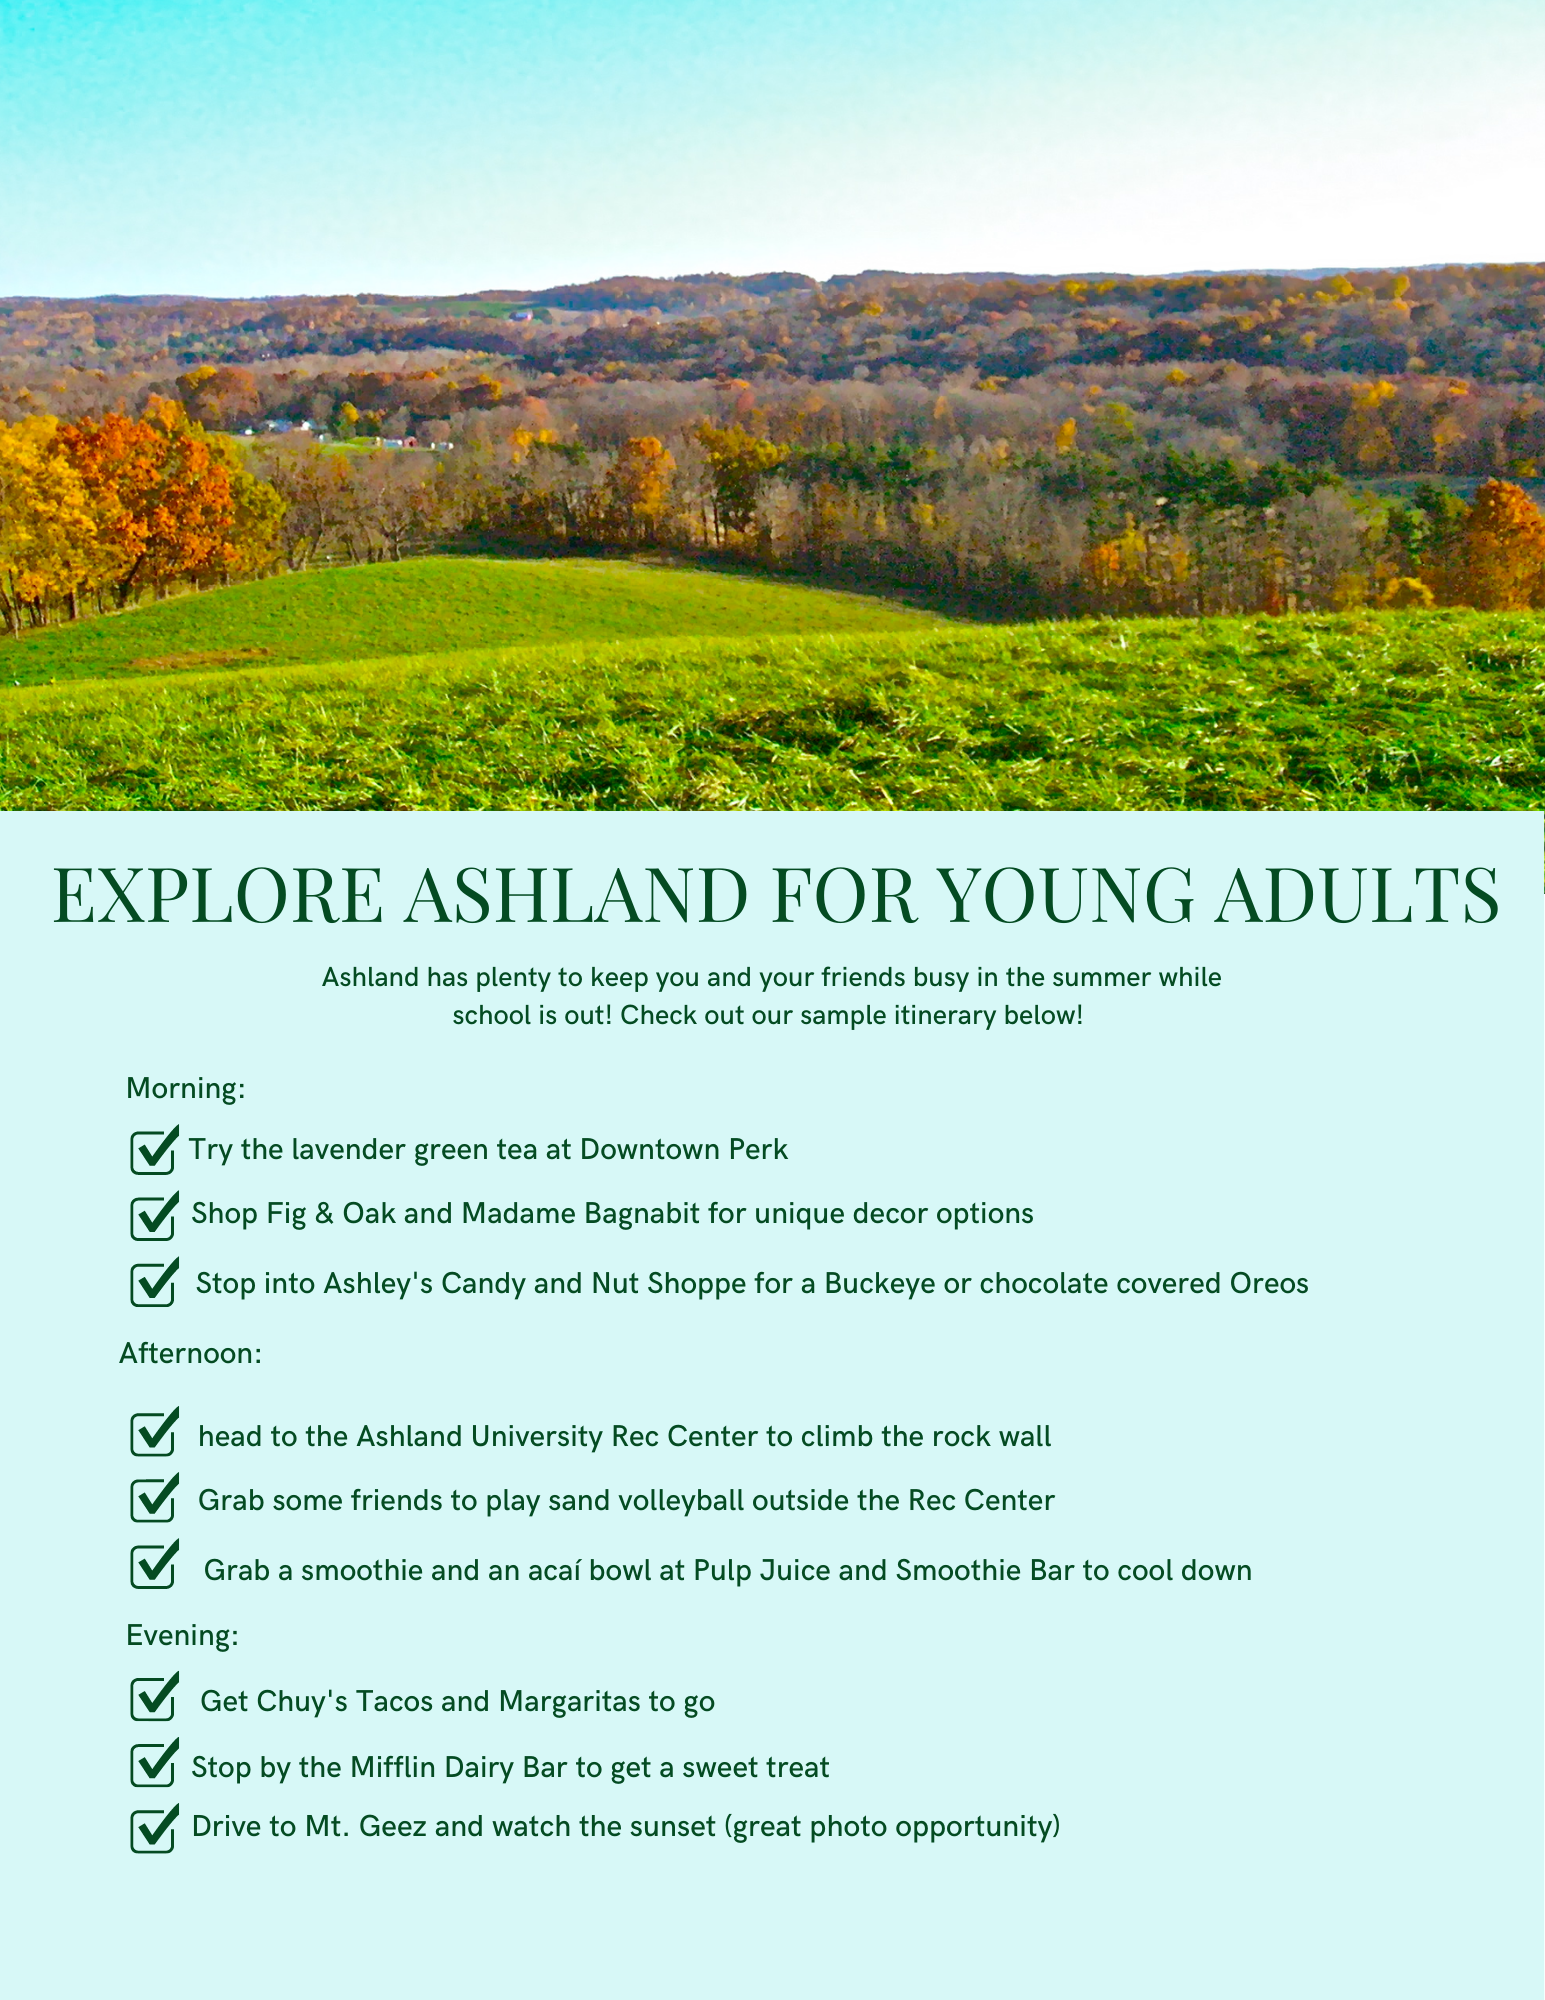 Explore Ashland Itinerary for Young Adults 